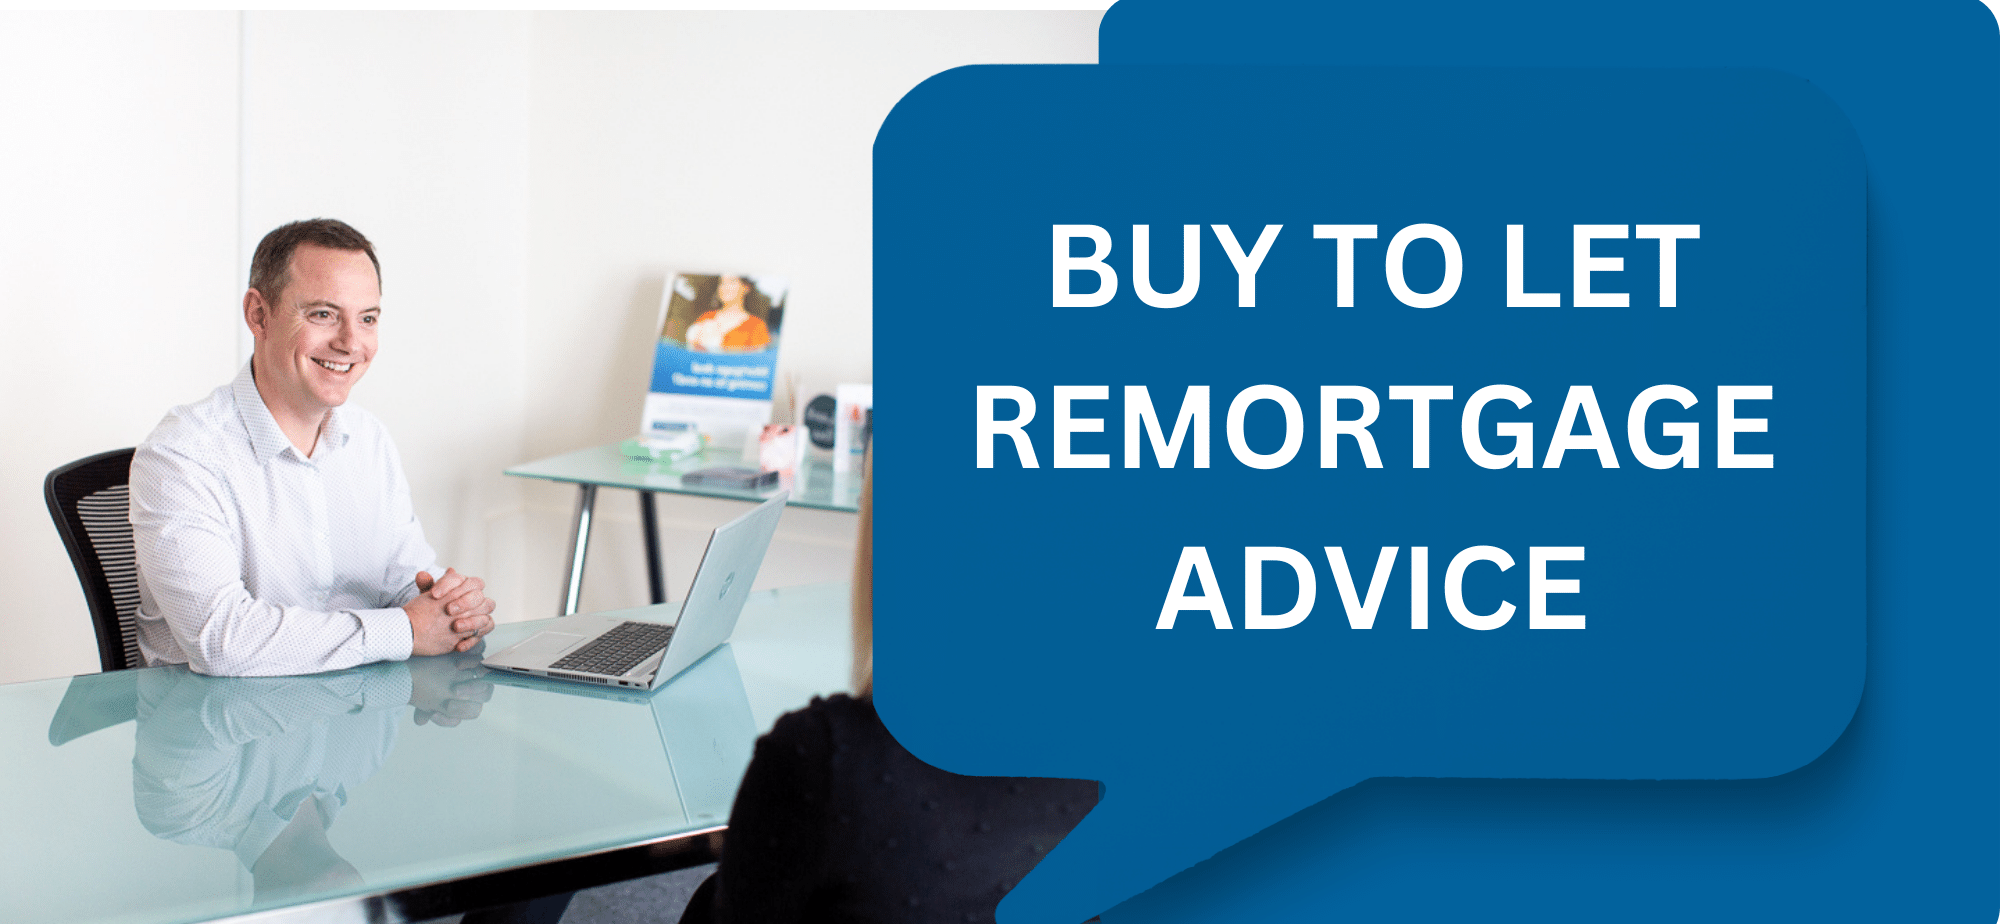 Buy to Let remortgage advice